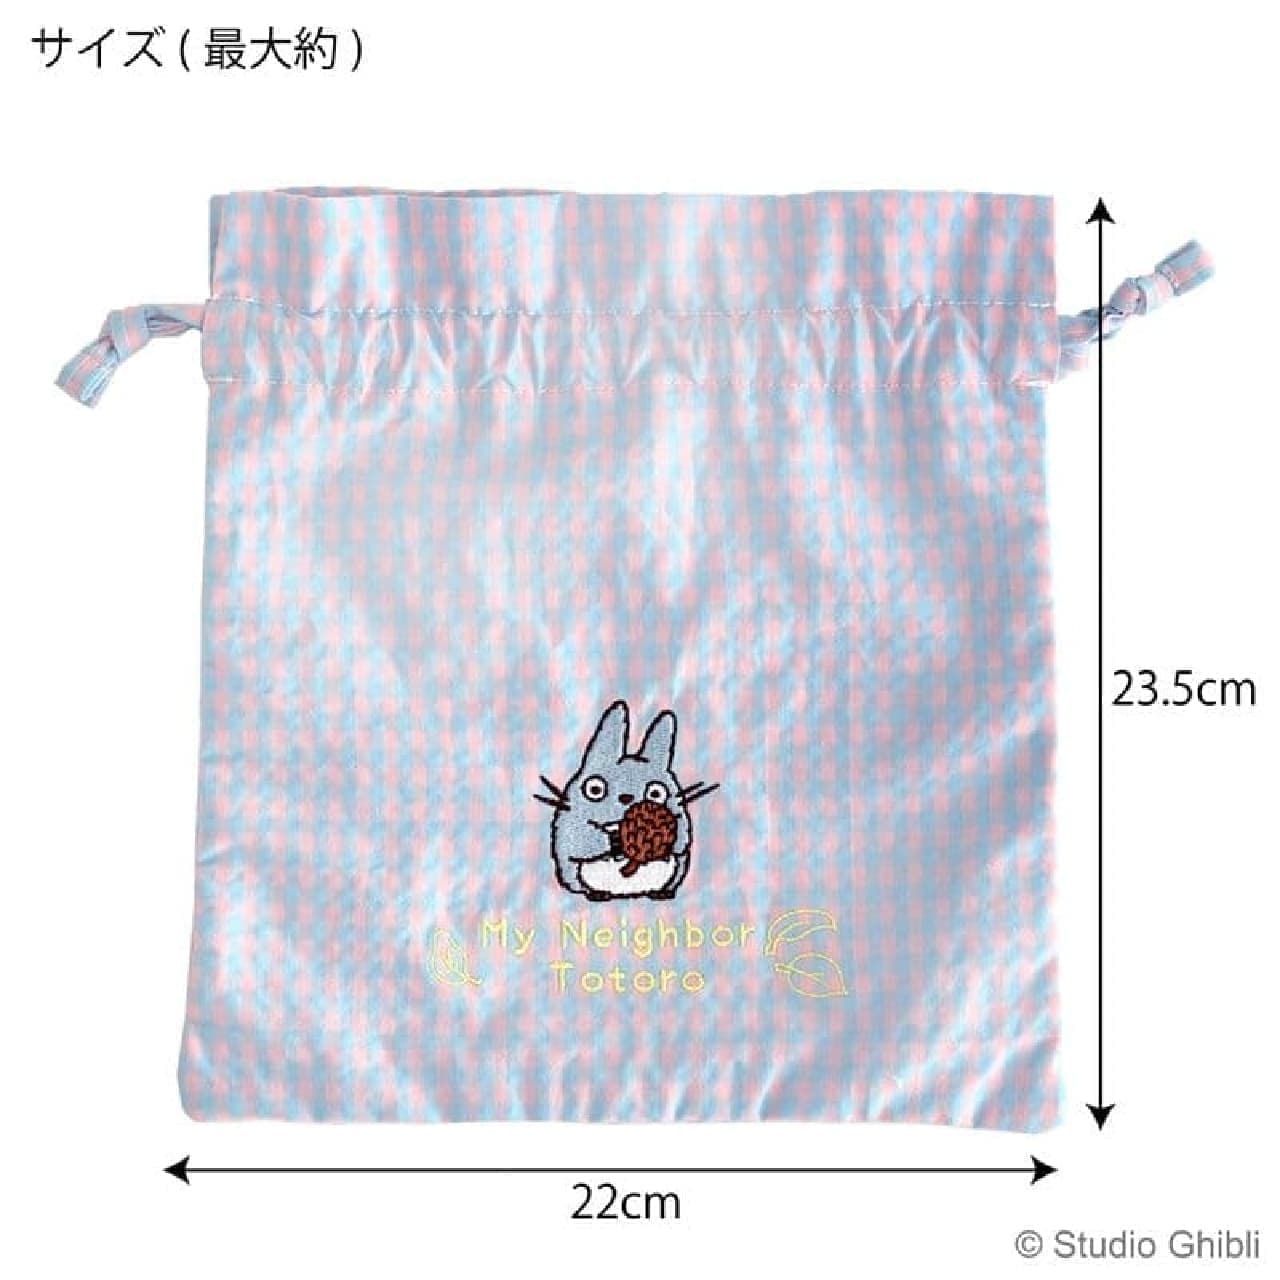 Post Office "My Neighbor Totoro Daily Goods Collection